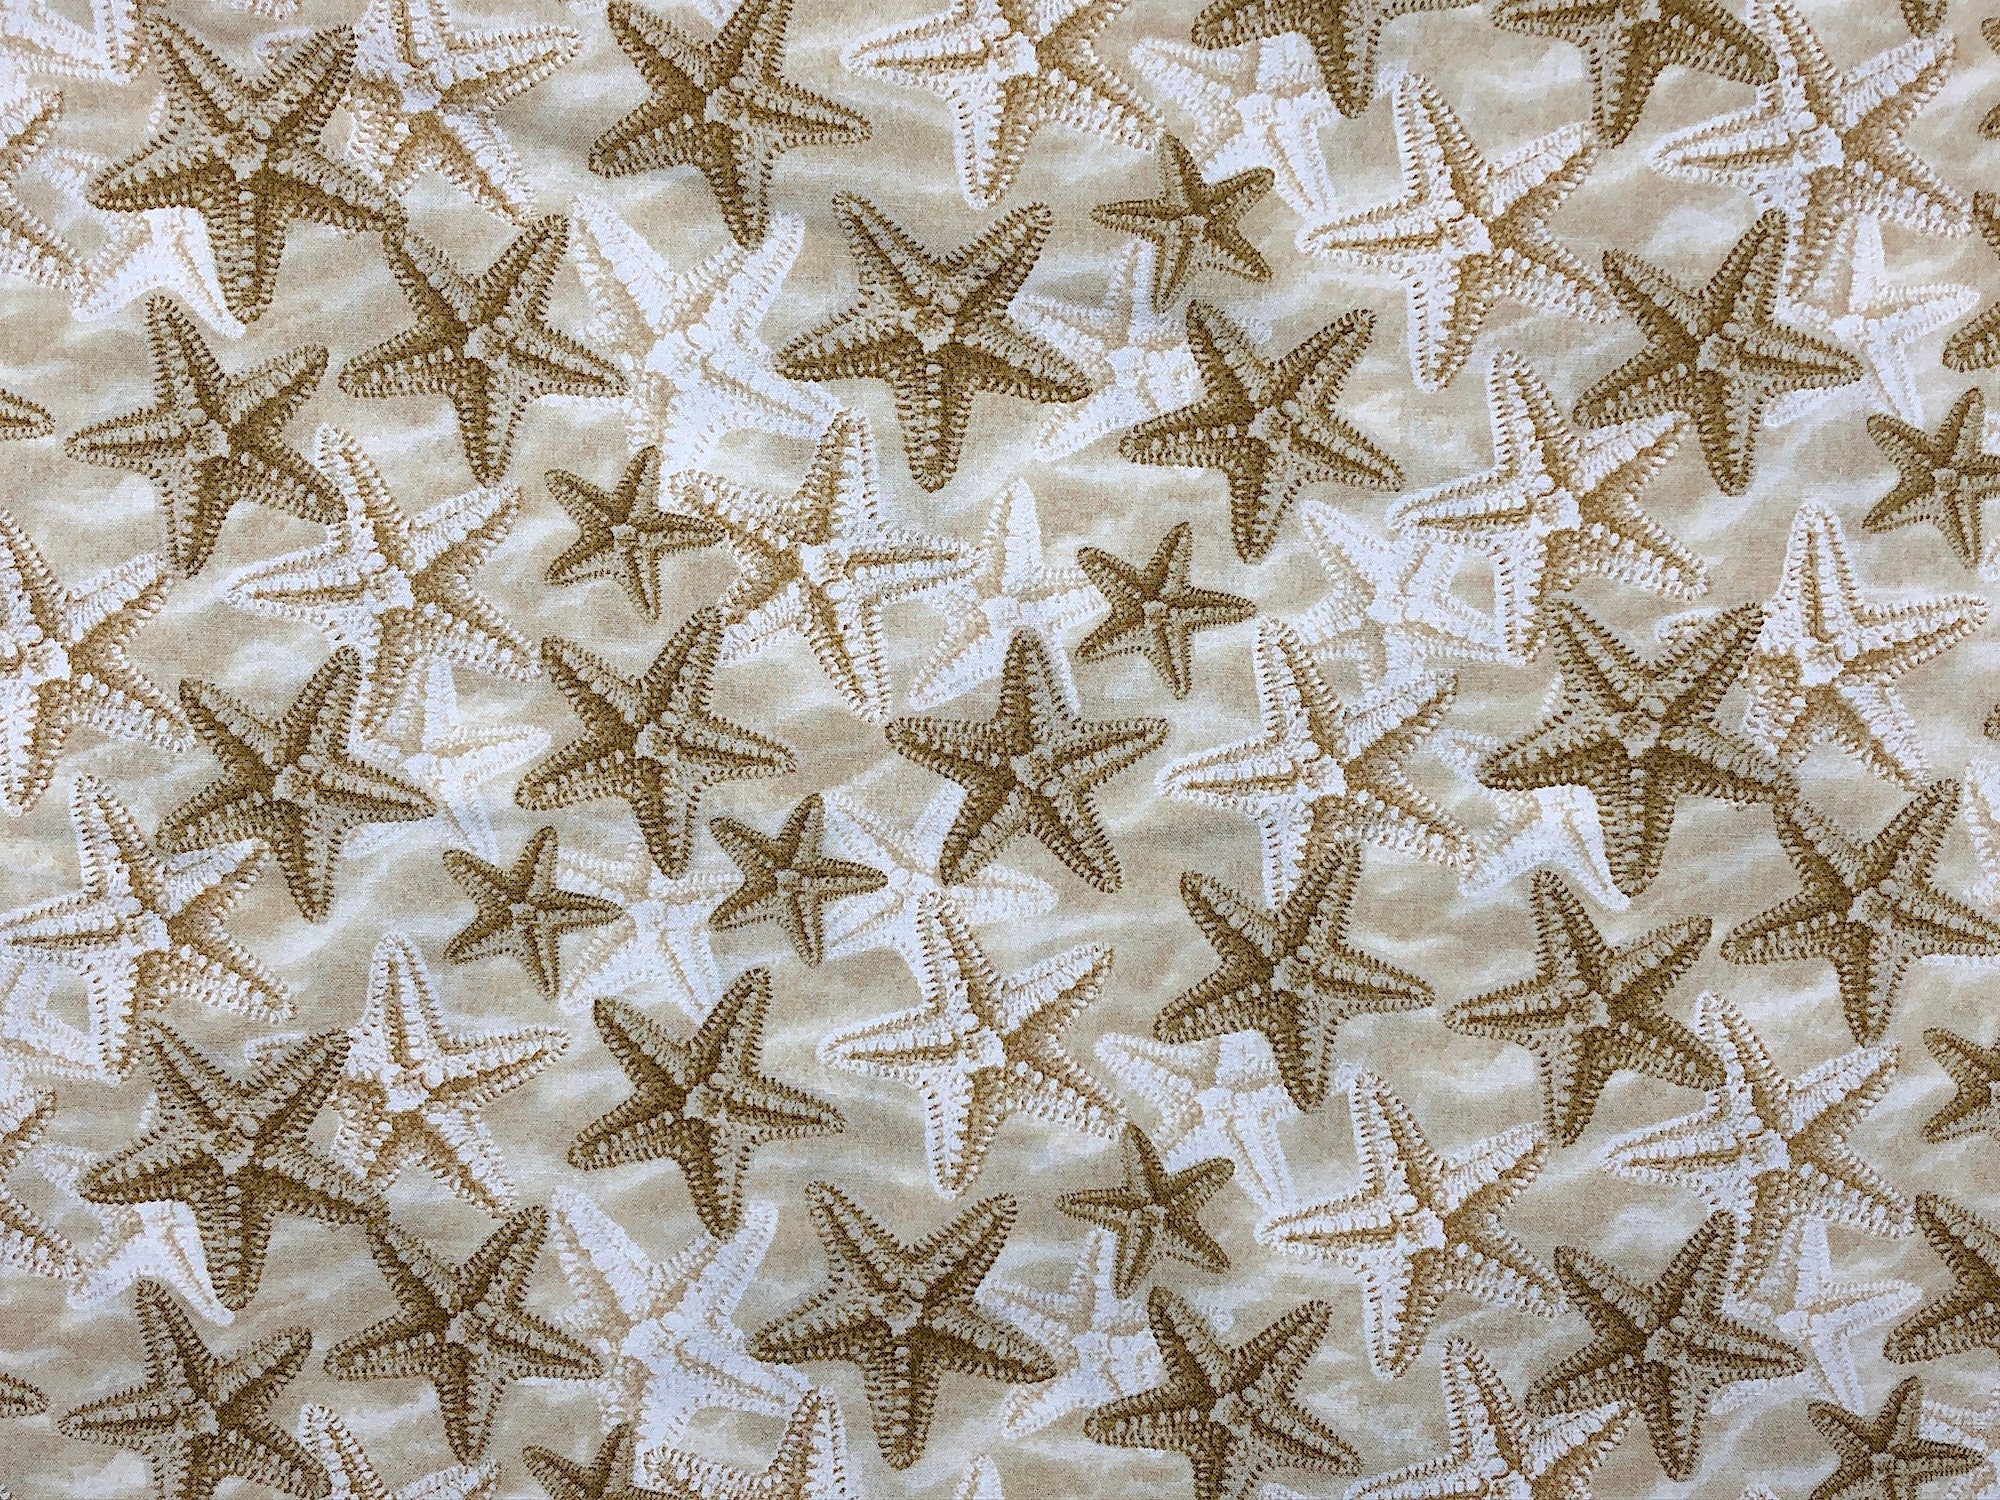 This fabric is covered with starfish on a sand background